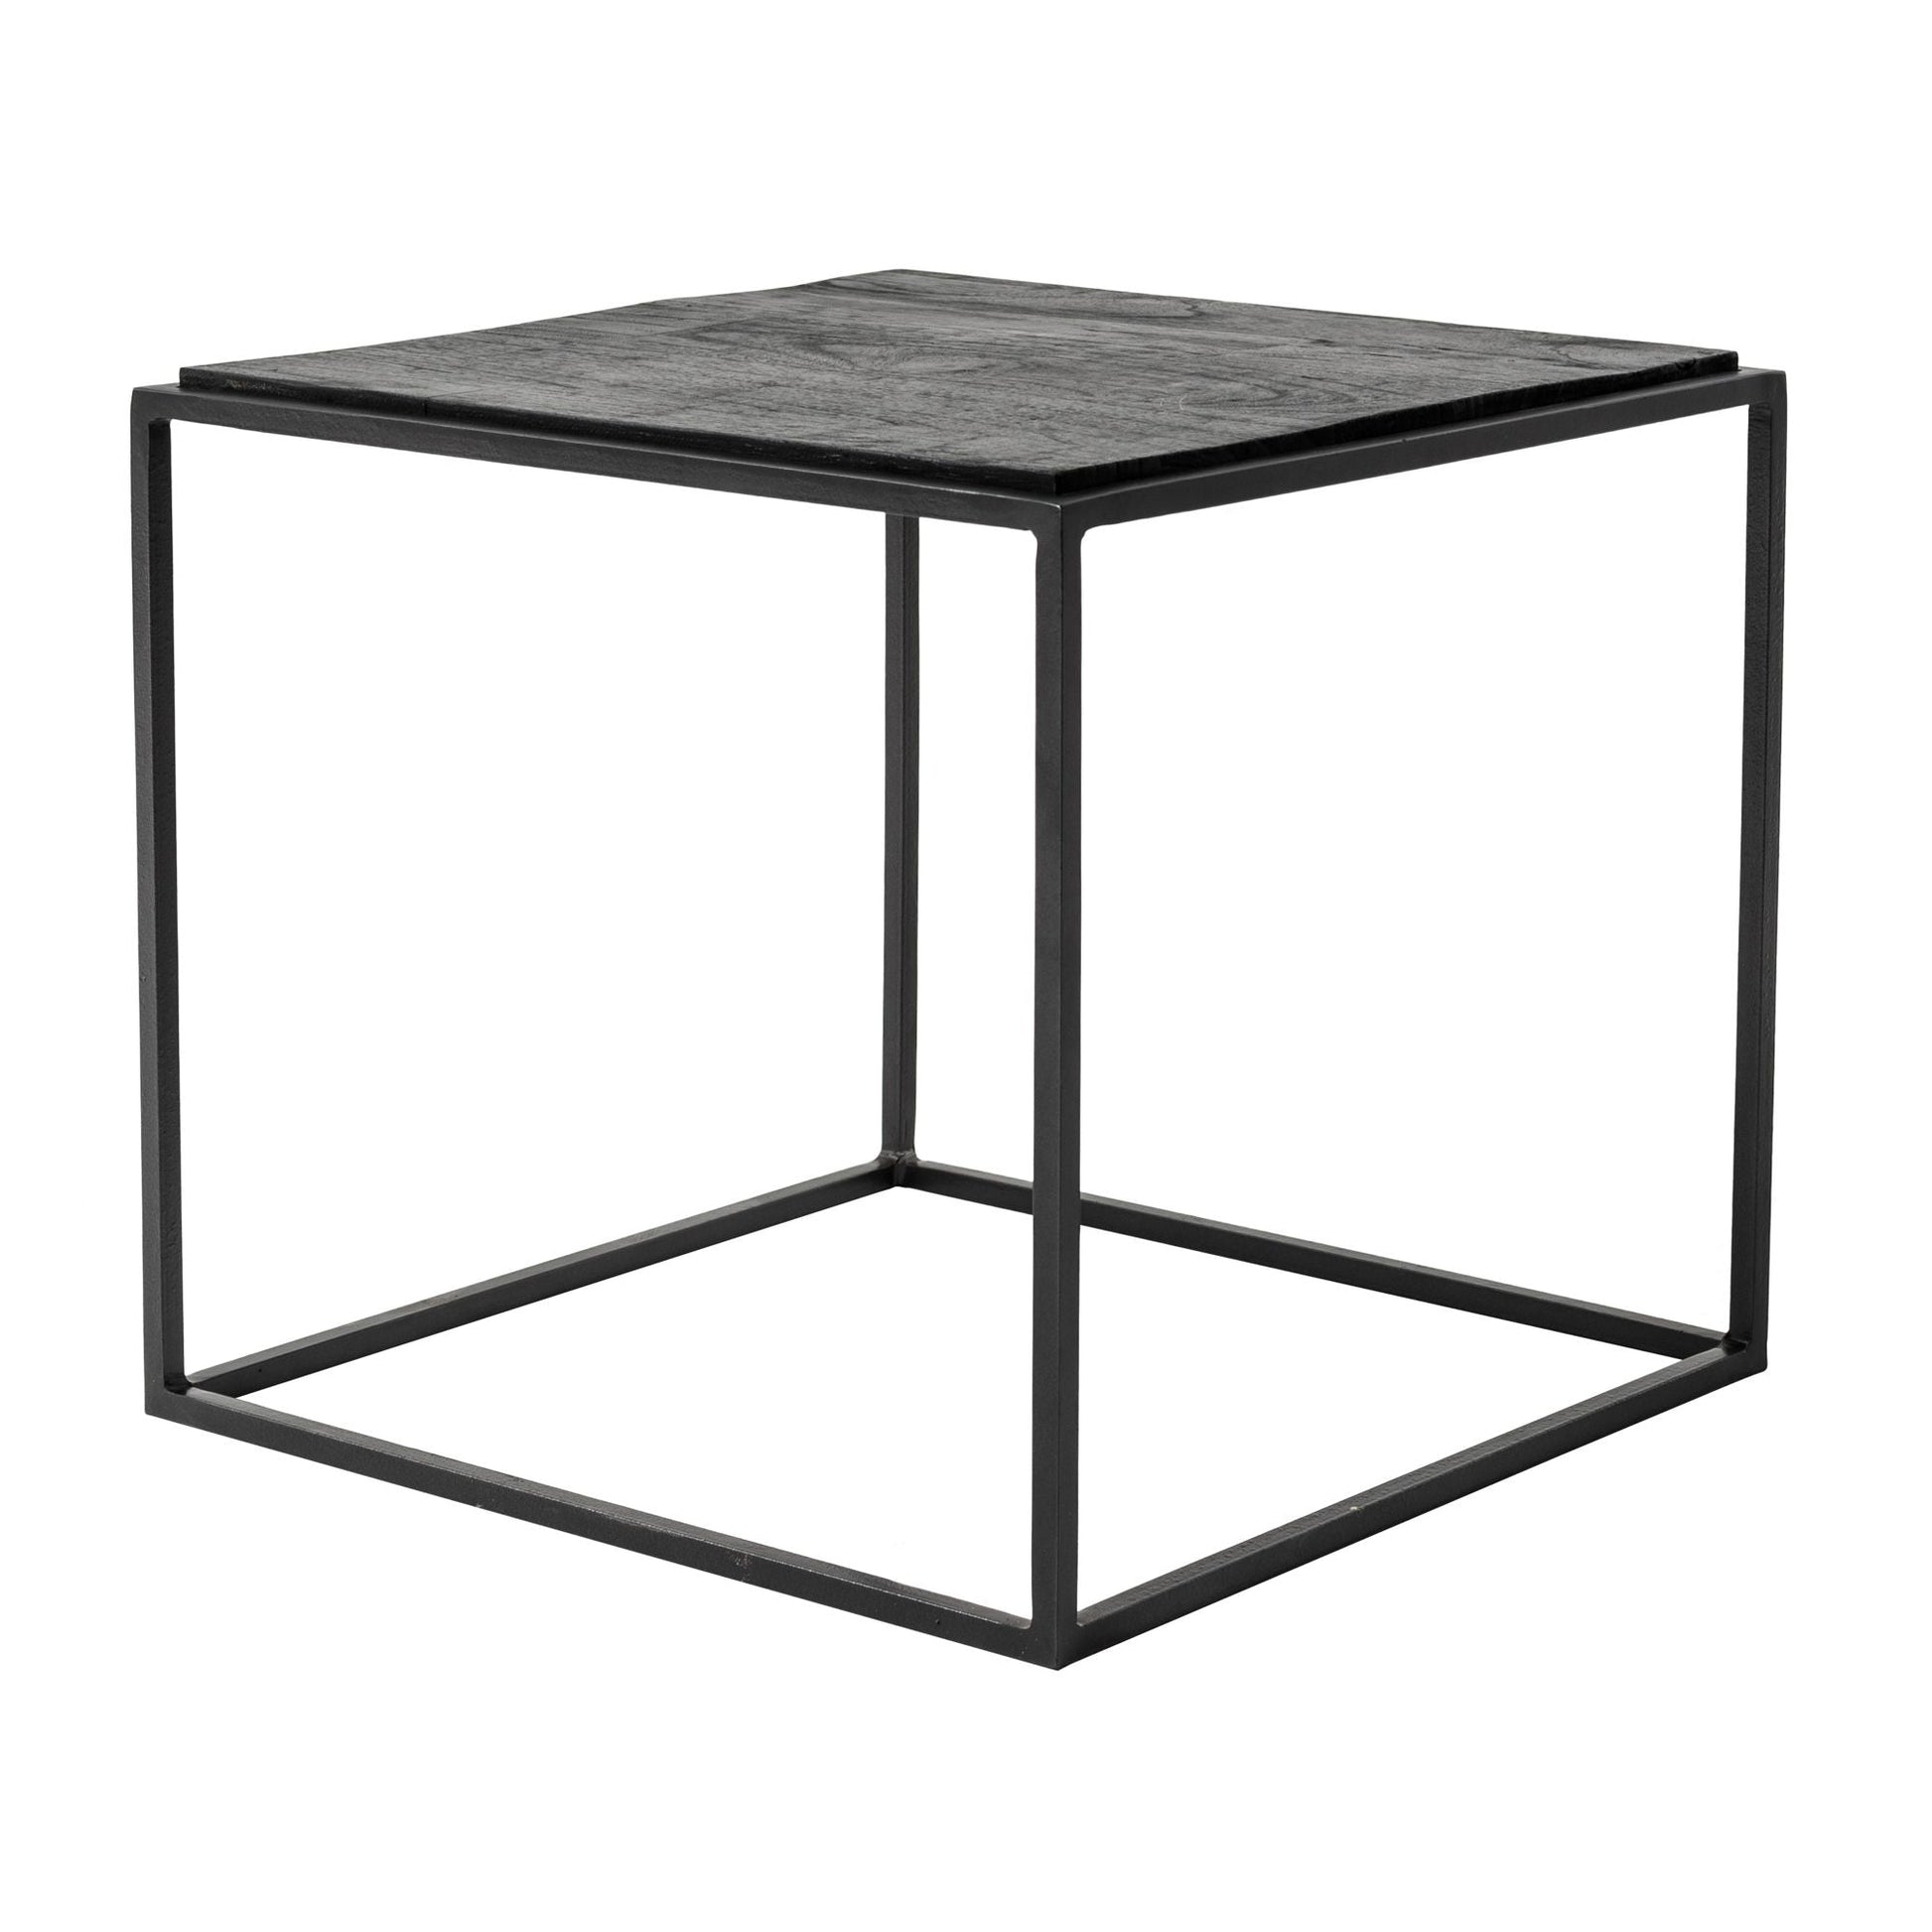 NovaSolo Rustika 39" Black Rustic Boat Wood Coffee Table With 2 Nested Side Tables